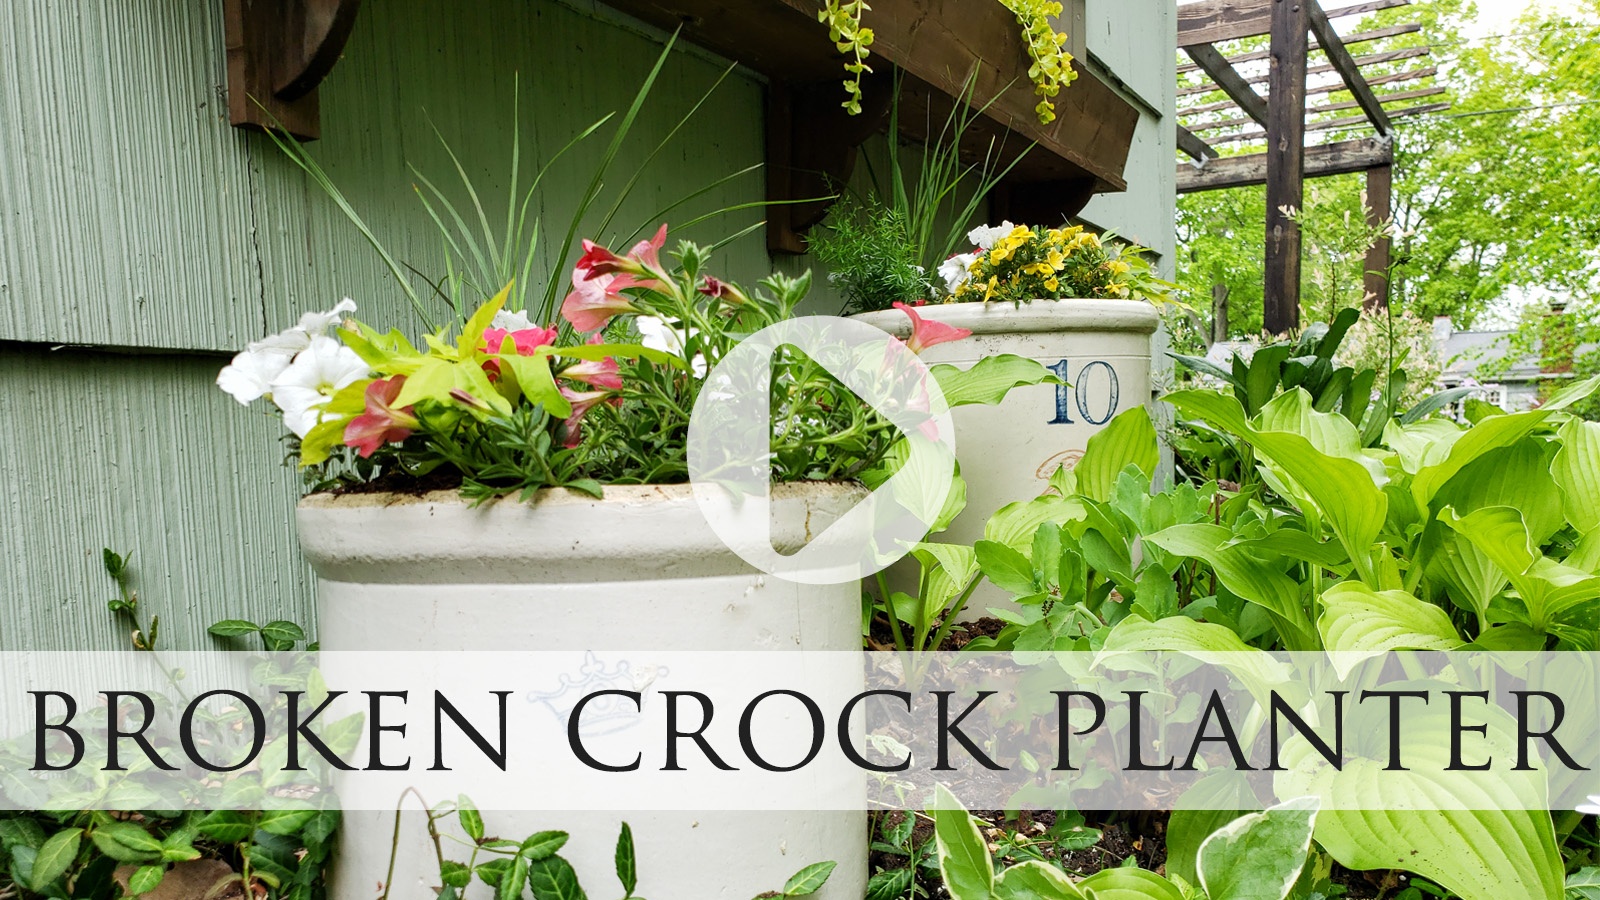 Video Tutorial for a Broken Crock Planter for your Garden Beds by Larissa of Prodigal Pieces | prodigalpieces.com #prodigalpieces